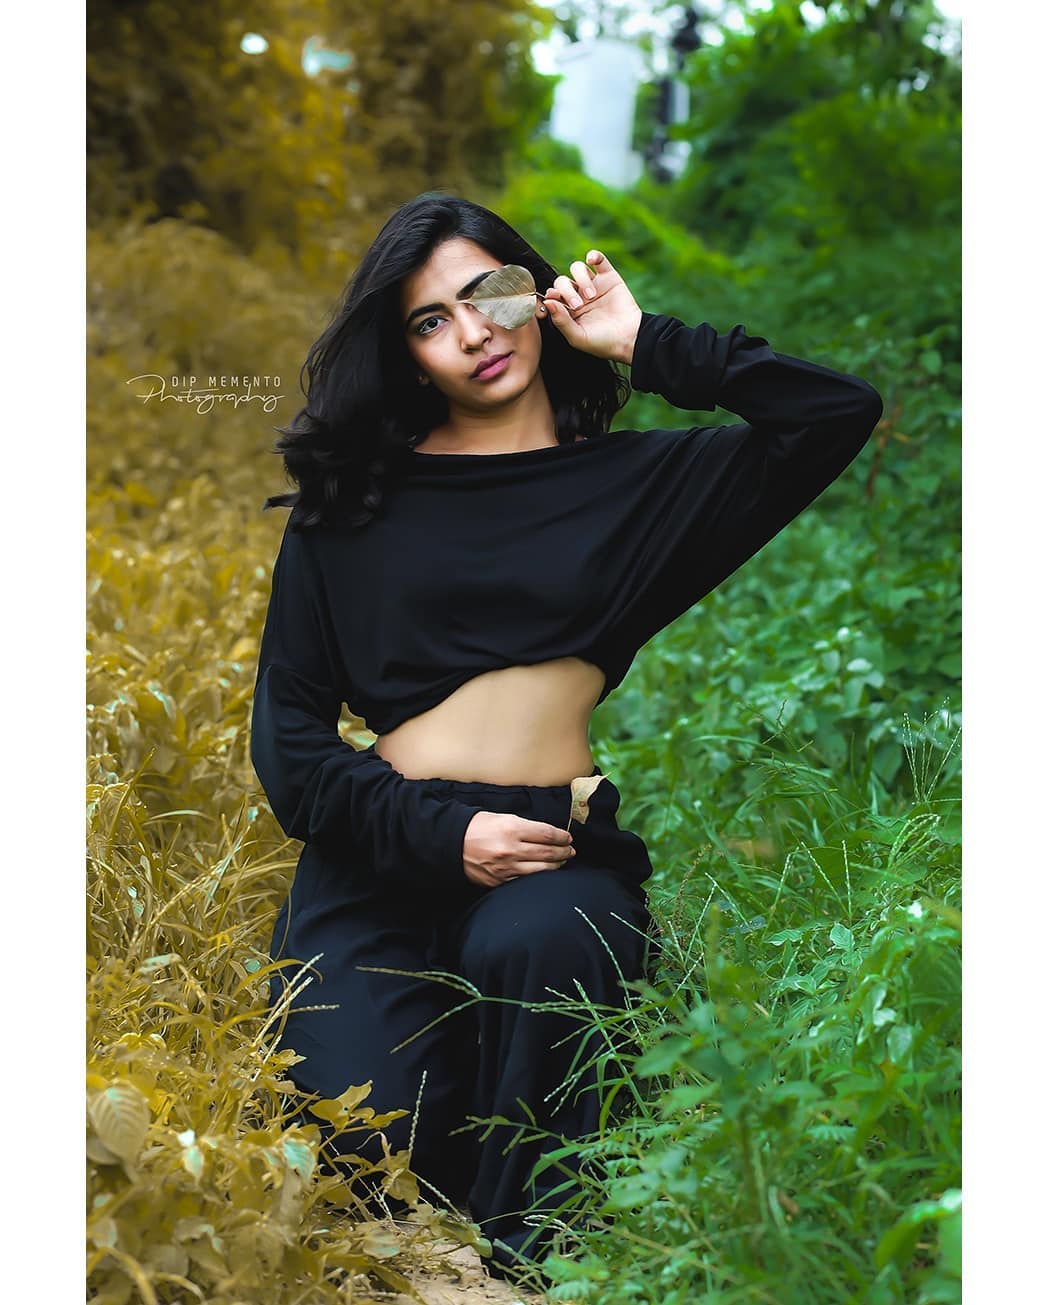 Just Get L O S T!

And get lost in the B A S I C you are made of.

Trust me, it’s the best place..
.
.

InFrame :komal
.
.
Dance with Nature Concept Shoot.

Shoot By: @dip_memento_photography, ---------------*--------------*----------------*---------------*---------
#streetshoot #streetclassicalshoot #streetconceptshoot #conceptshoot #conceptphotoshoot #ahmedabad #dipmementophotography 
#dslrofficial  #dance #photooftheday #portraitsofficial #50mm  #picoftheday  #girl #indiafeature #keeptagging #9924227745 #_ip #_ig  #bestoftheday #danceshoot #naturelovers
#indiaportraits #indiaportraits #sun #keepdancing